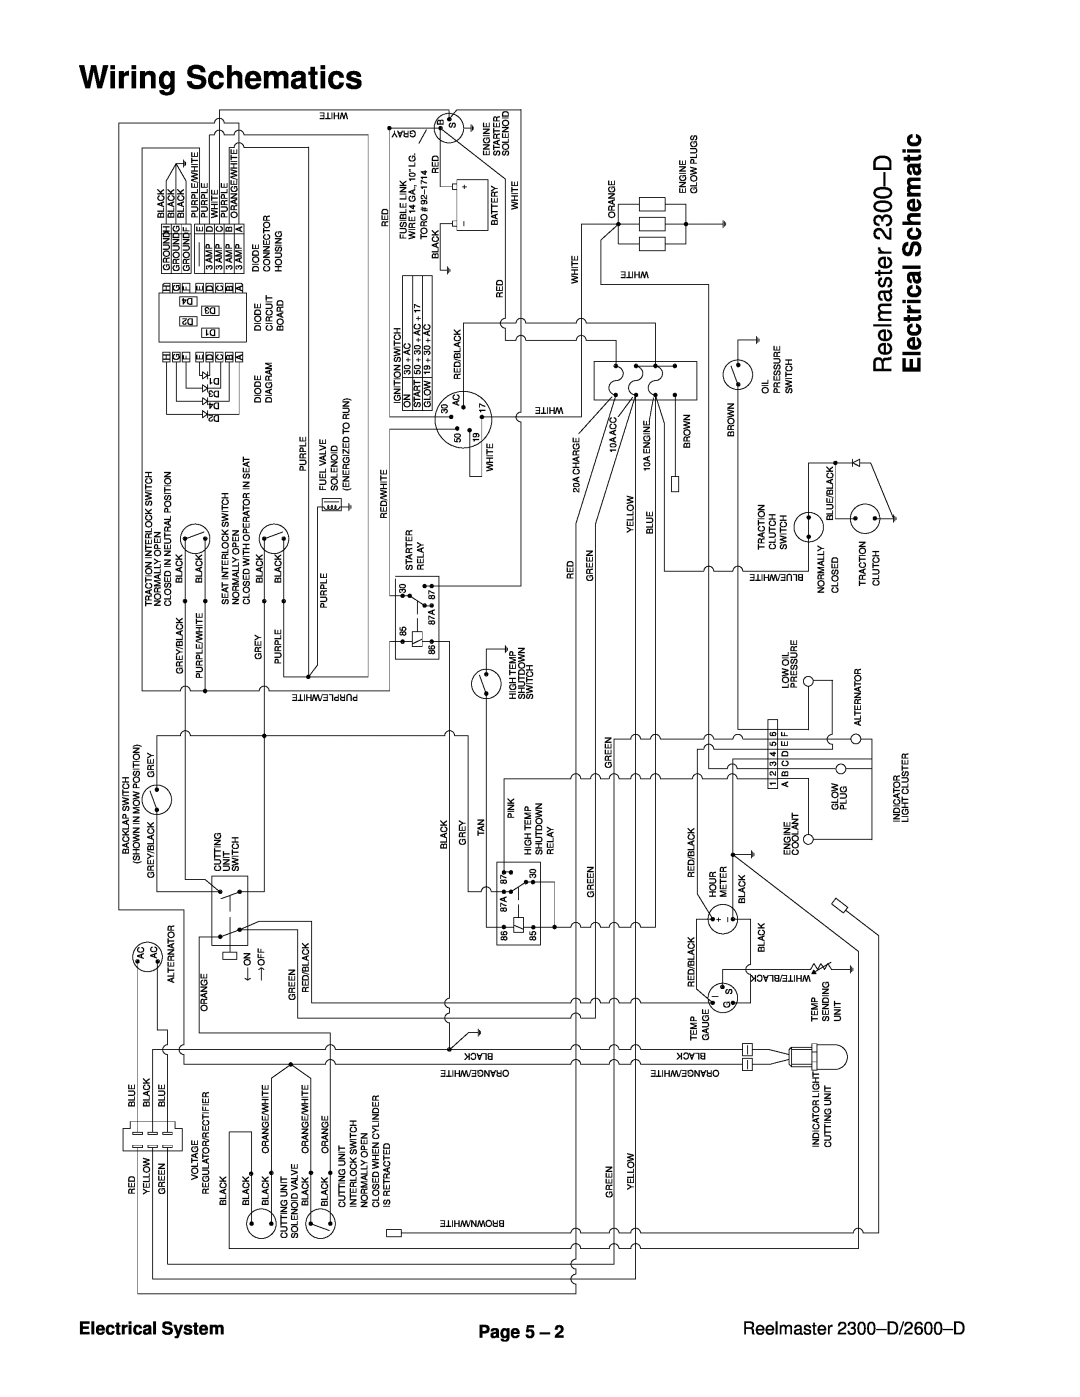 Toro 2300-D, 2600D service manual Wiring Schematics, Electrical Schematic, Reelmaster 2300±D, Electrical System Page 5 ± 